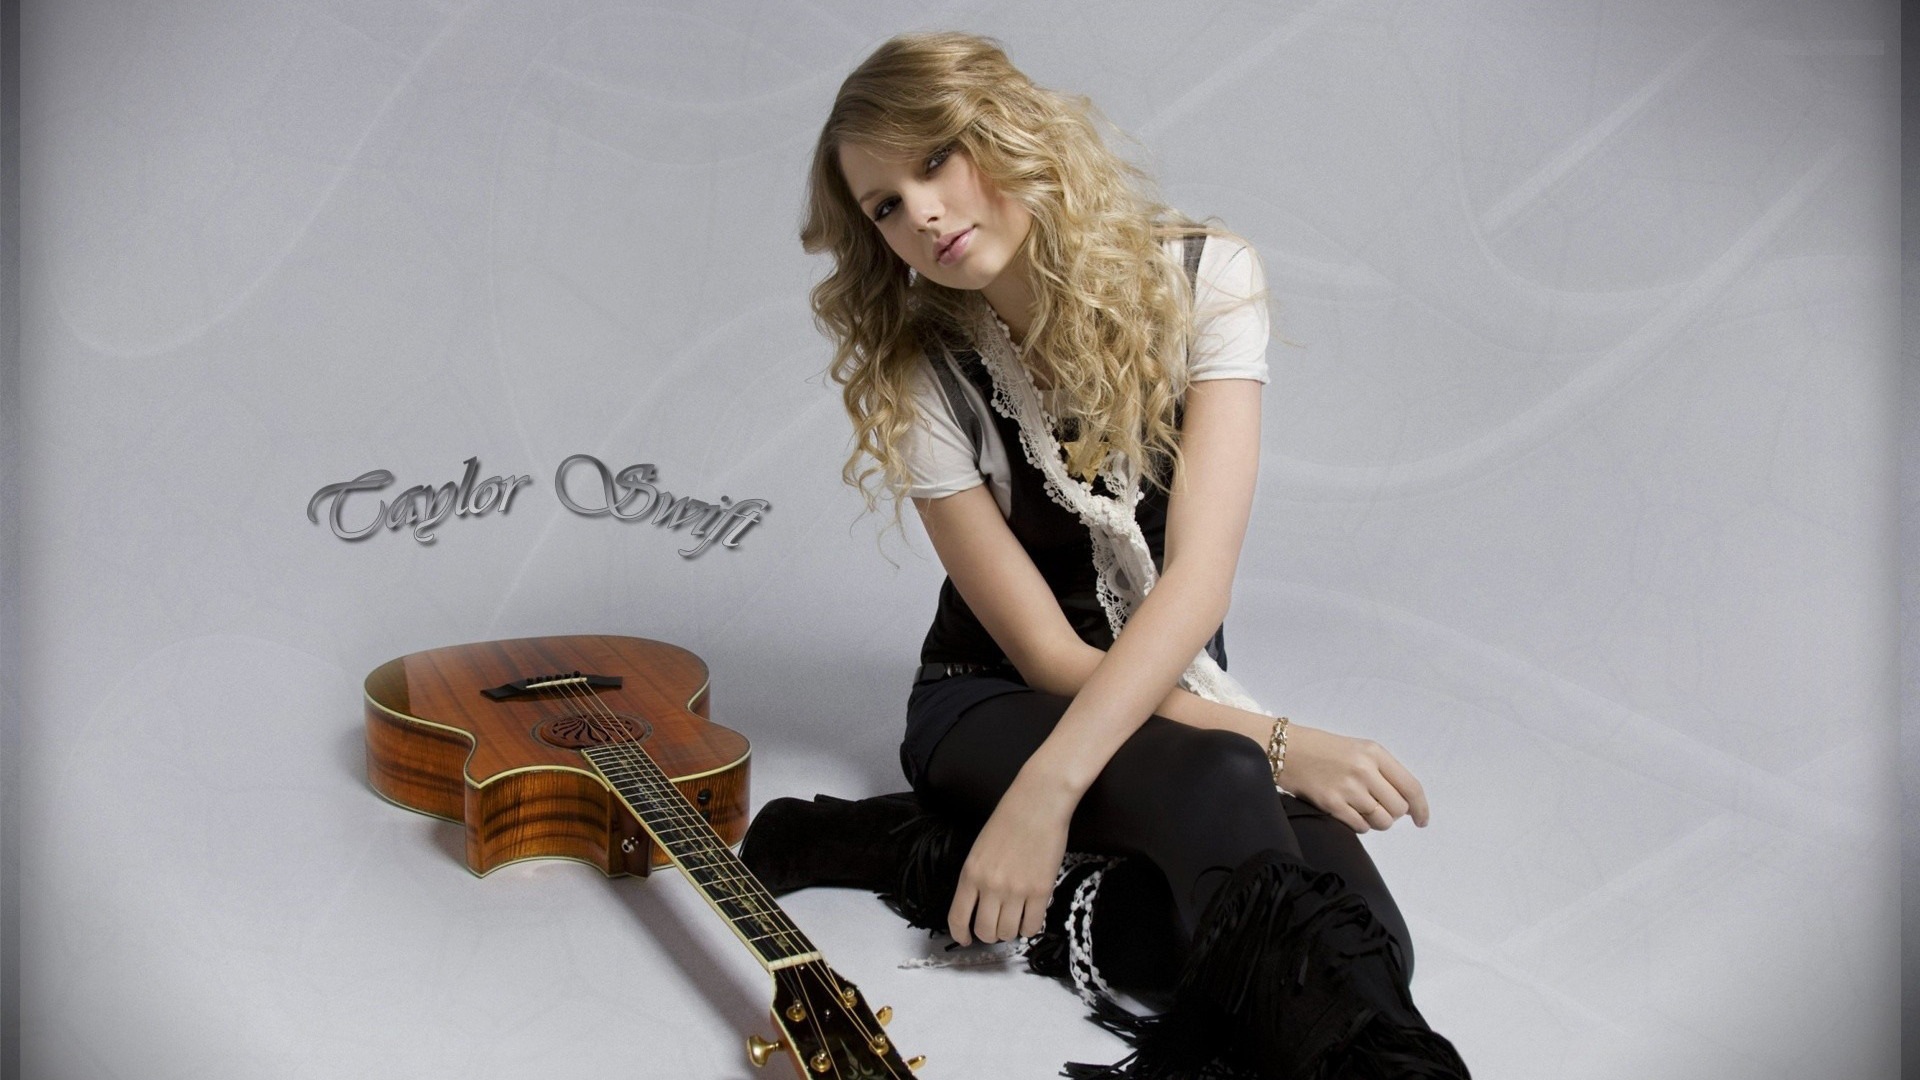 Taylor Swift Hd Wallpapers 12 | Free High Definition Unique Hd ...